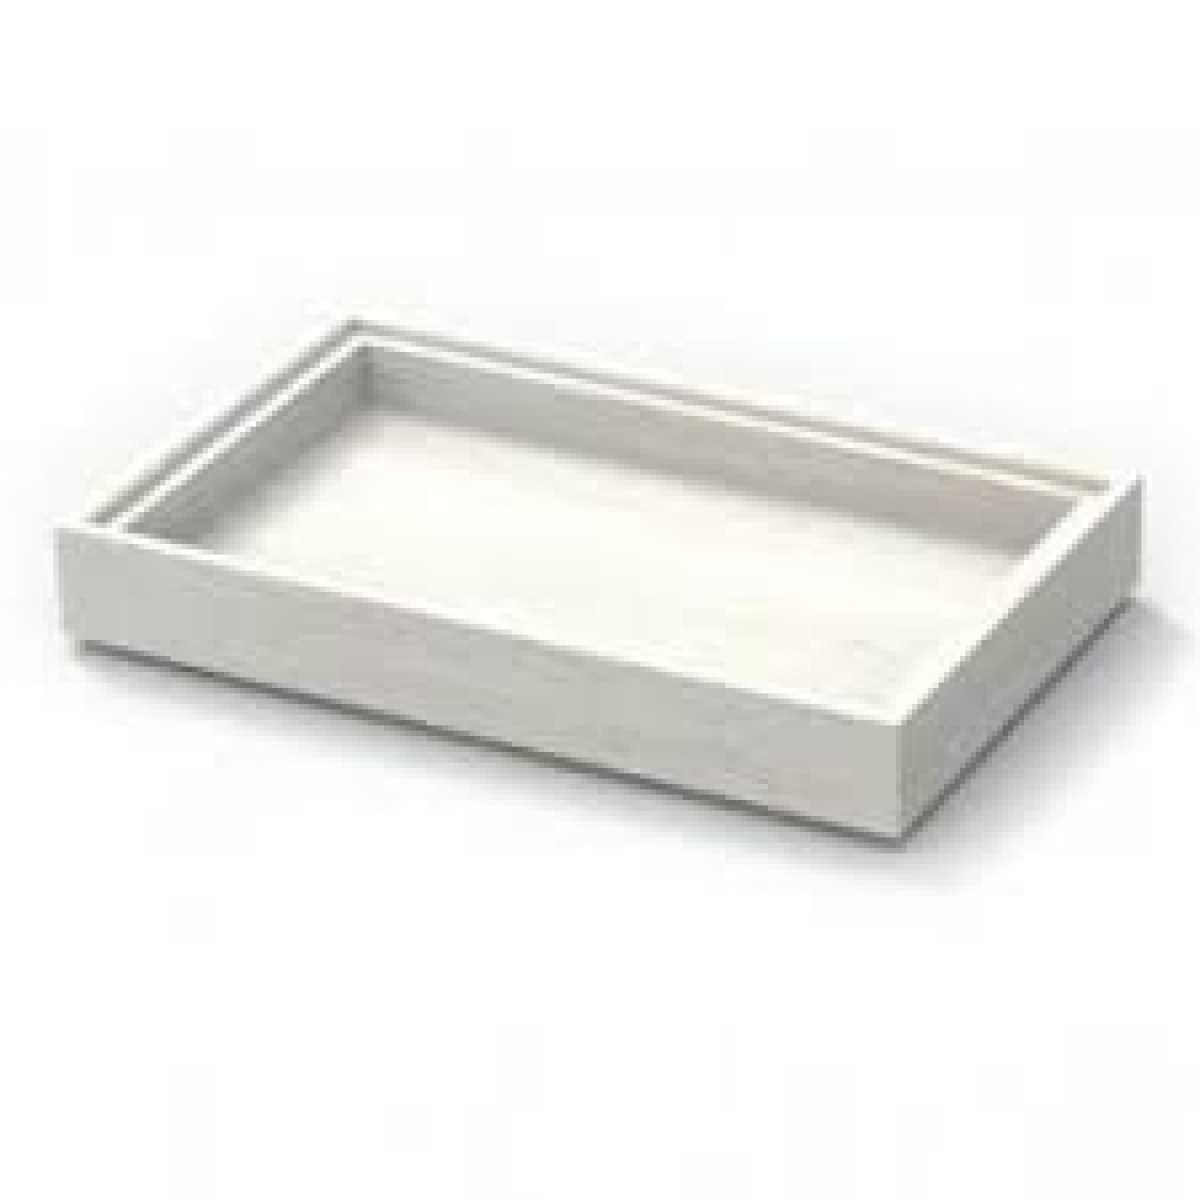 CRASTER Flow White-Washed Tray 2.4 - Tall